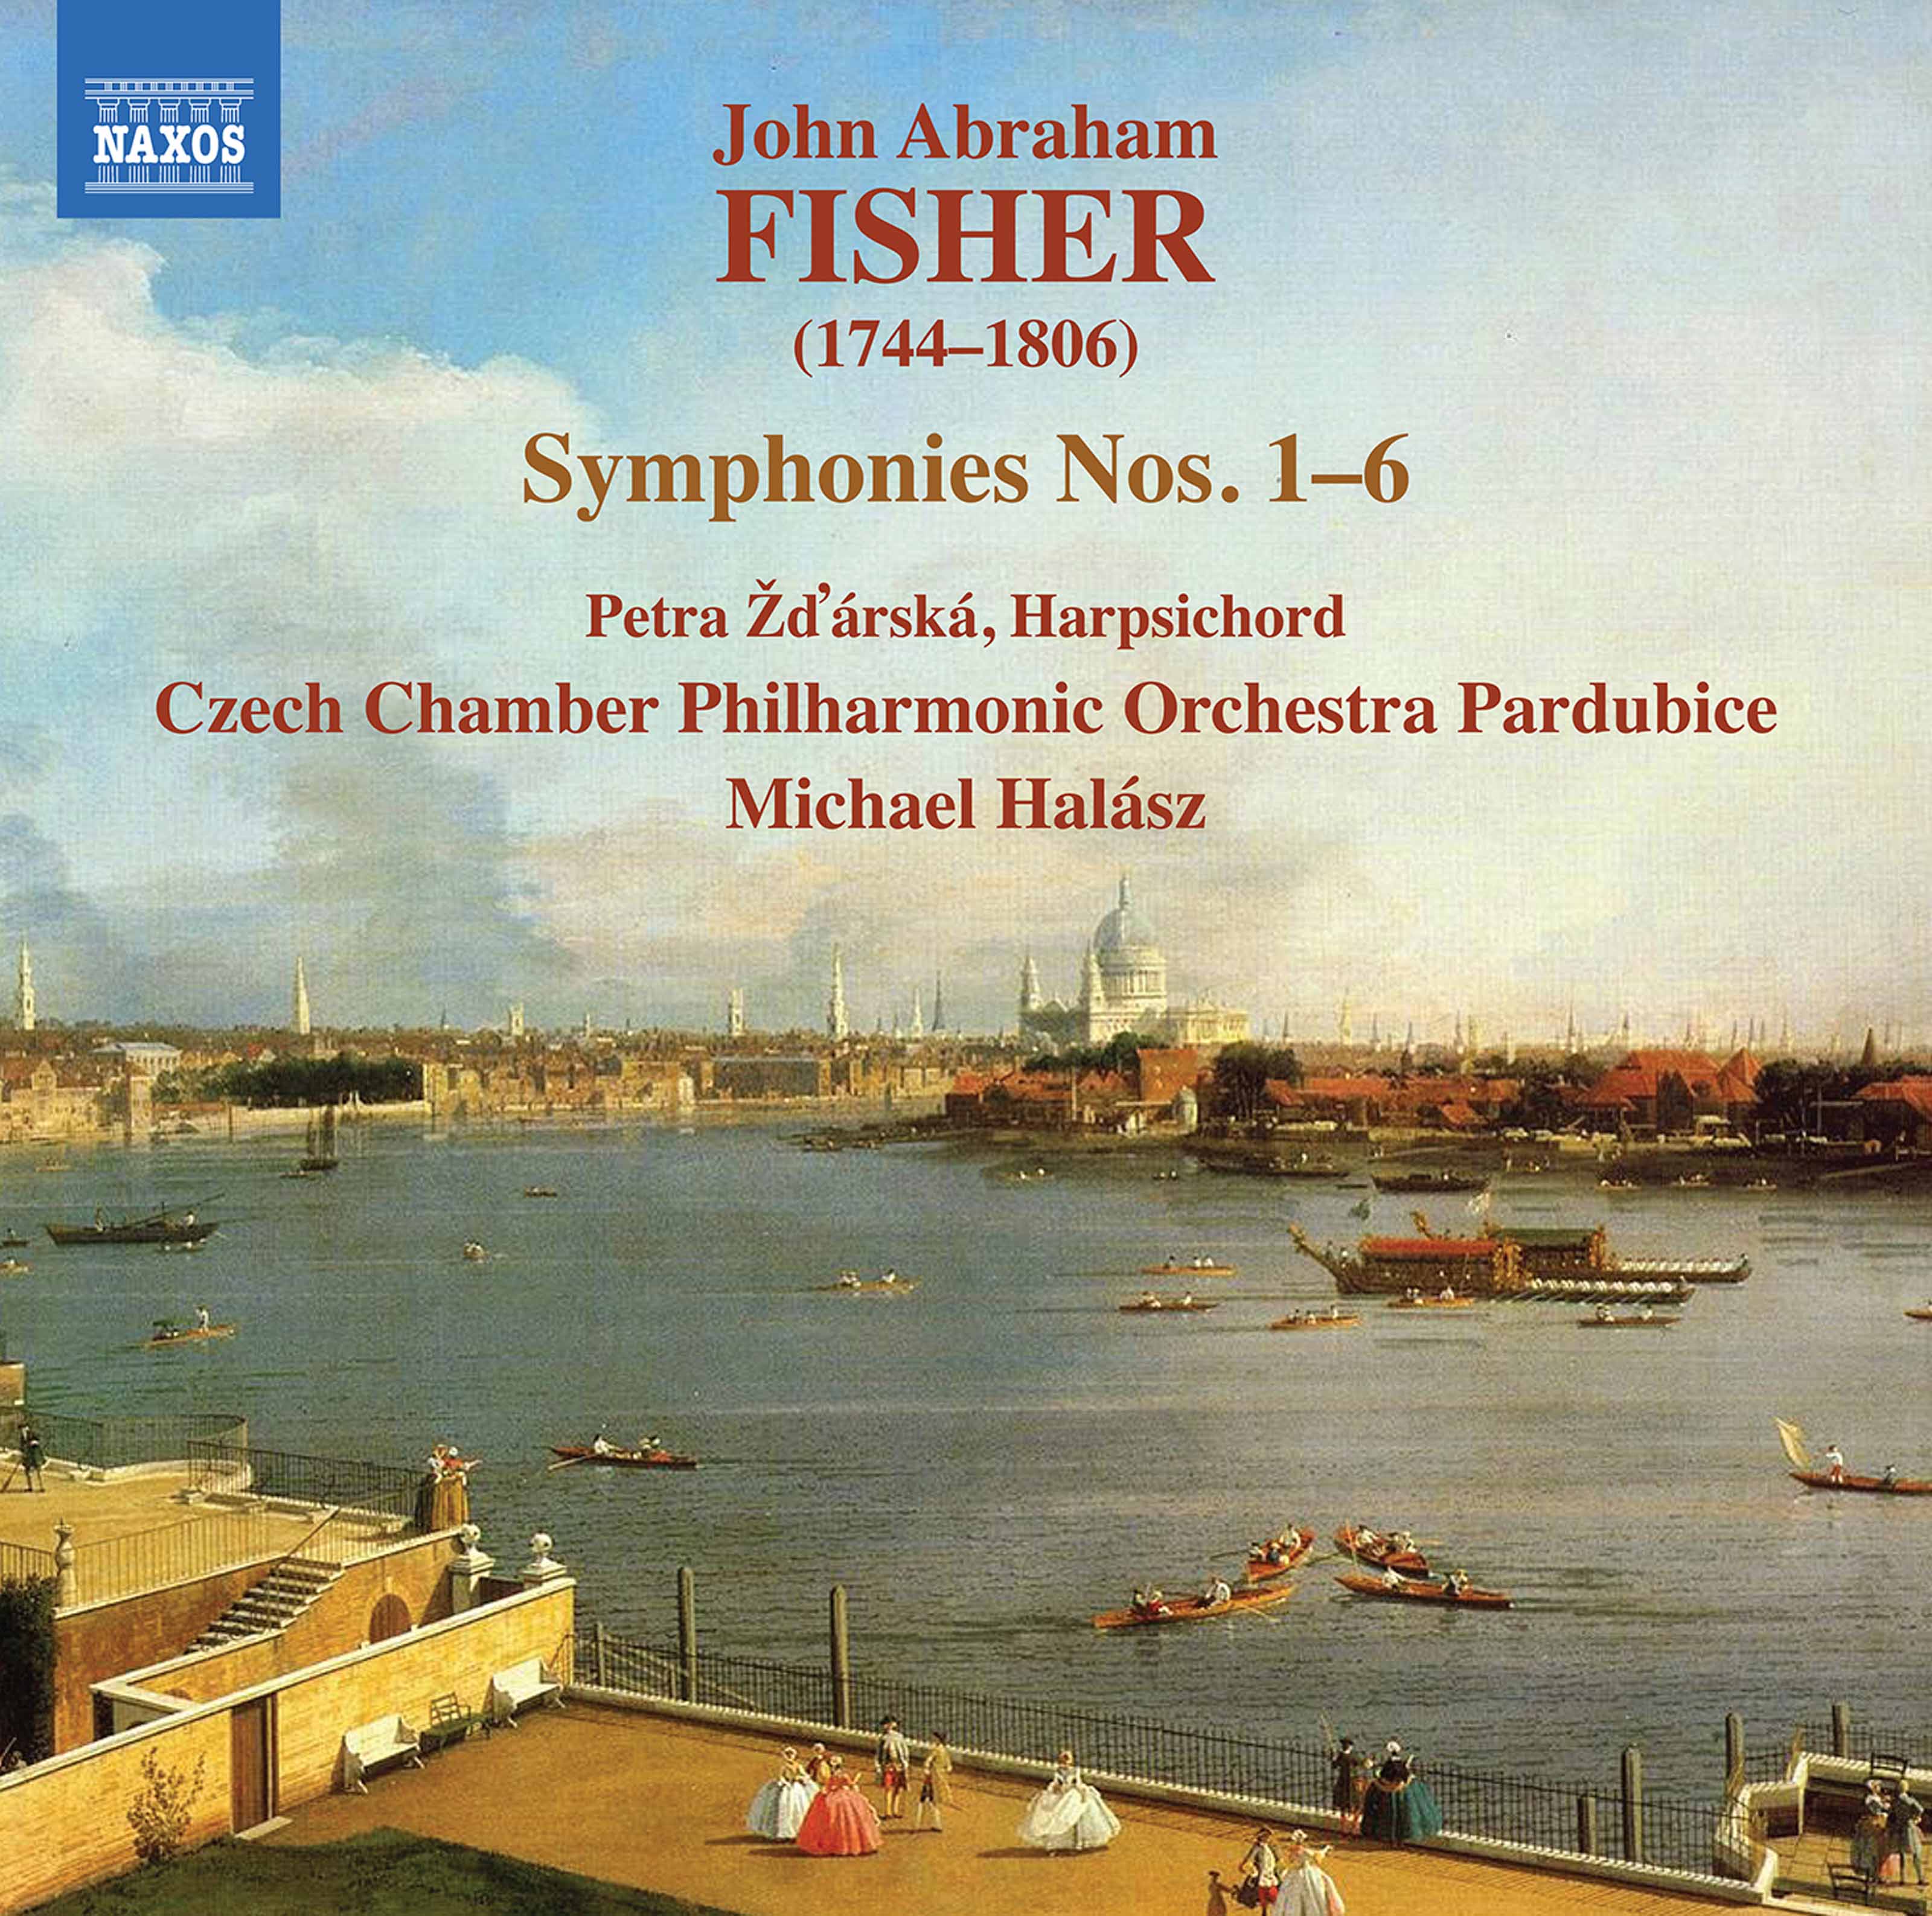 18th Century Discoveries: John Abraham Fisher's Symphonies